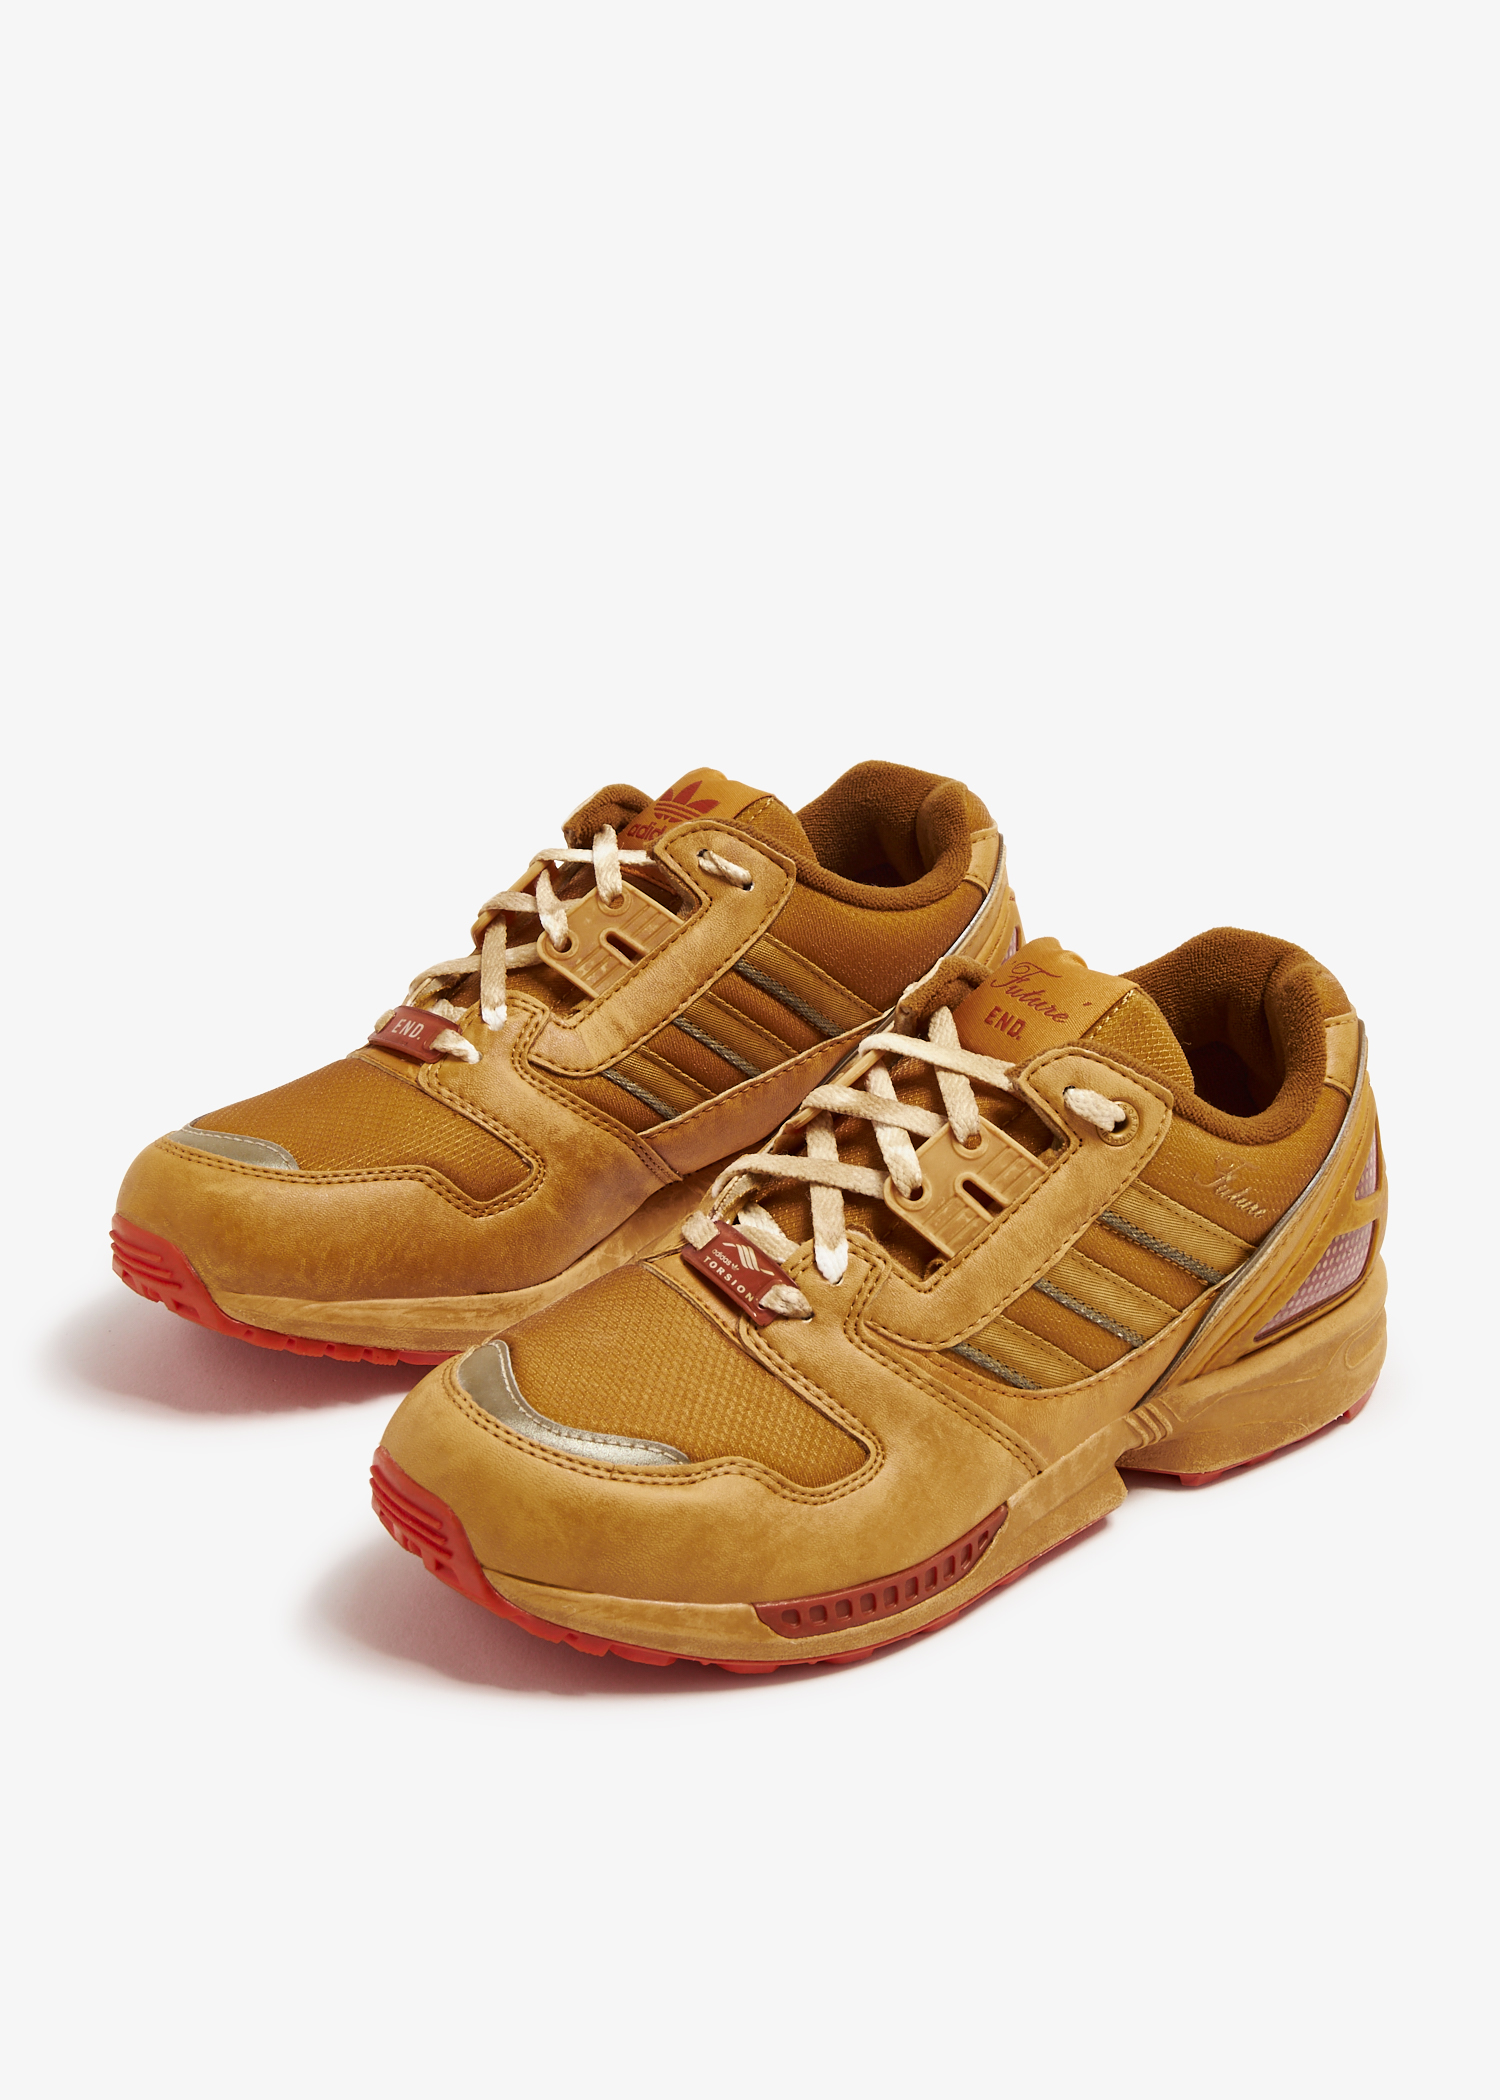 Adidas x END. ZX 8000 'Consortium Cup' sneakers for Men - Yellow 